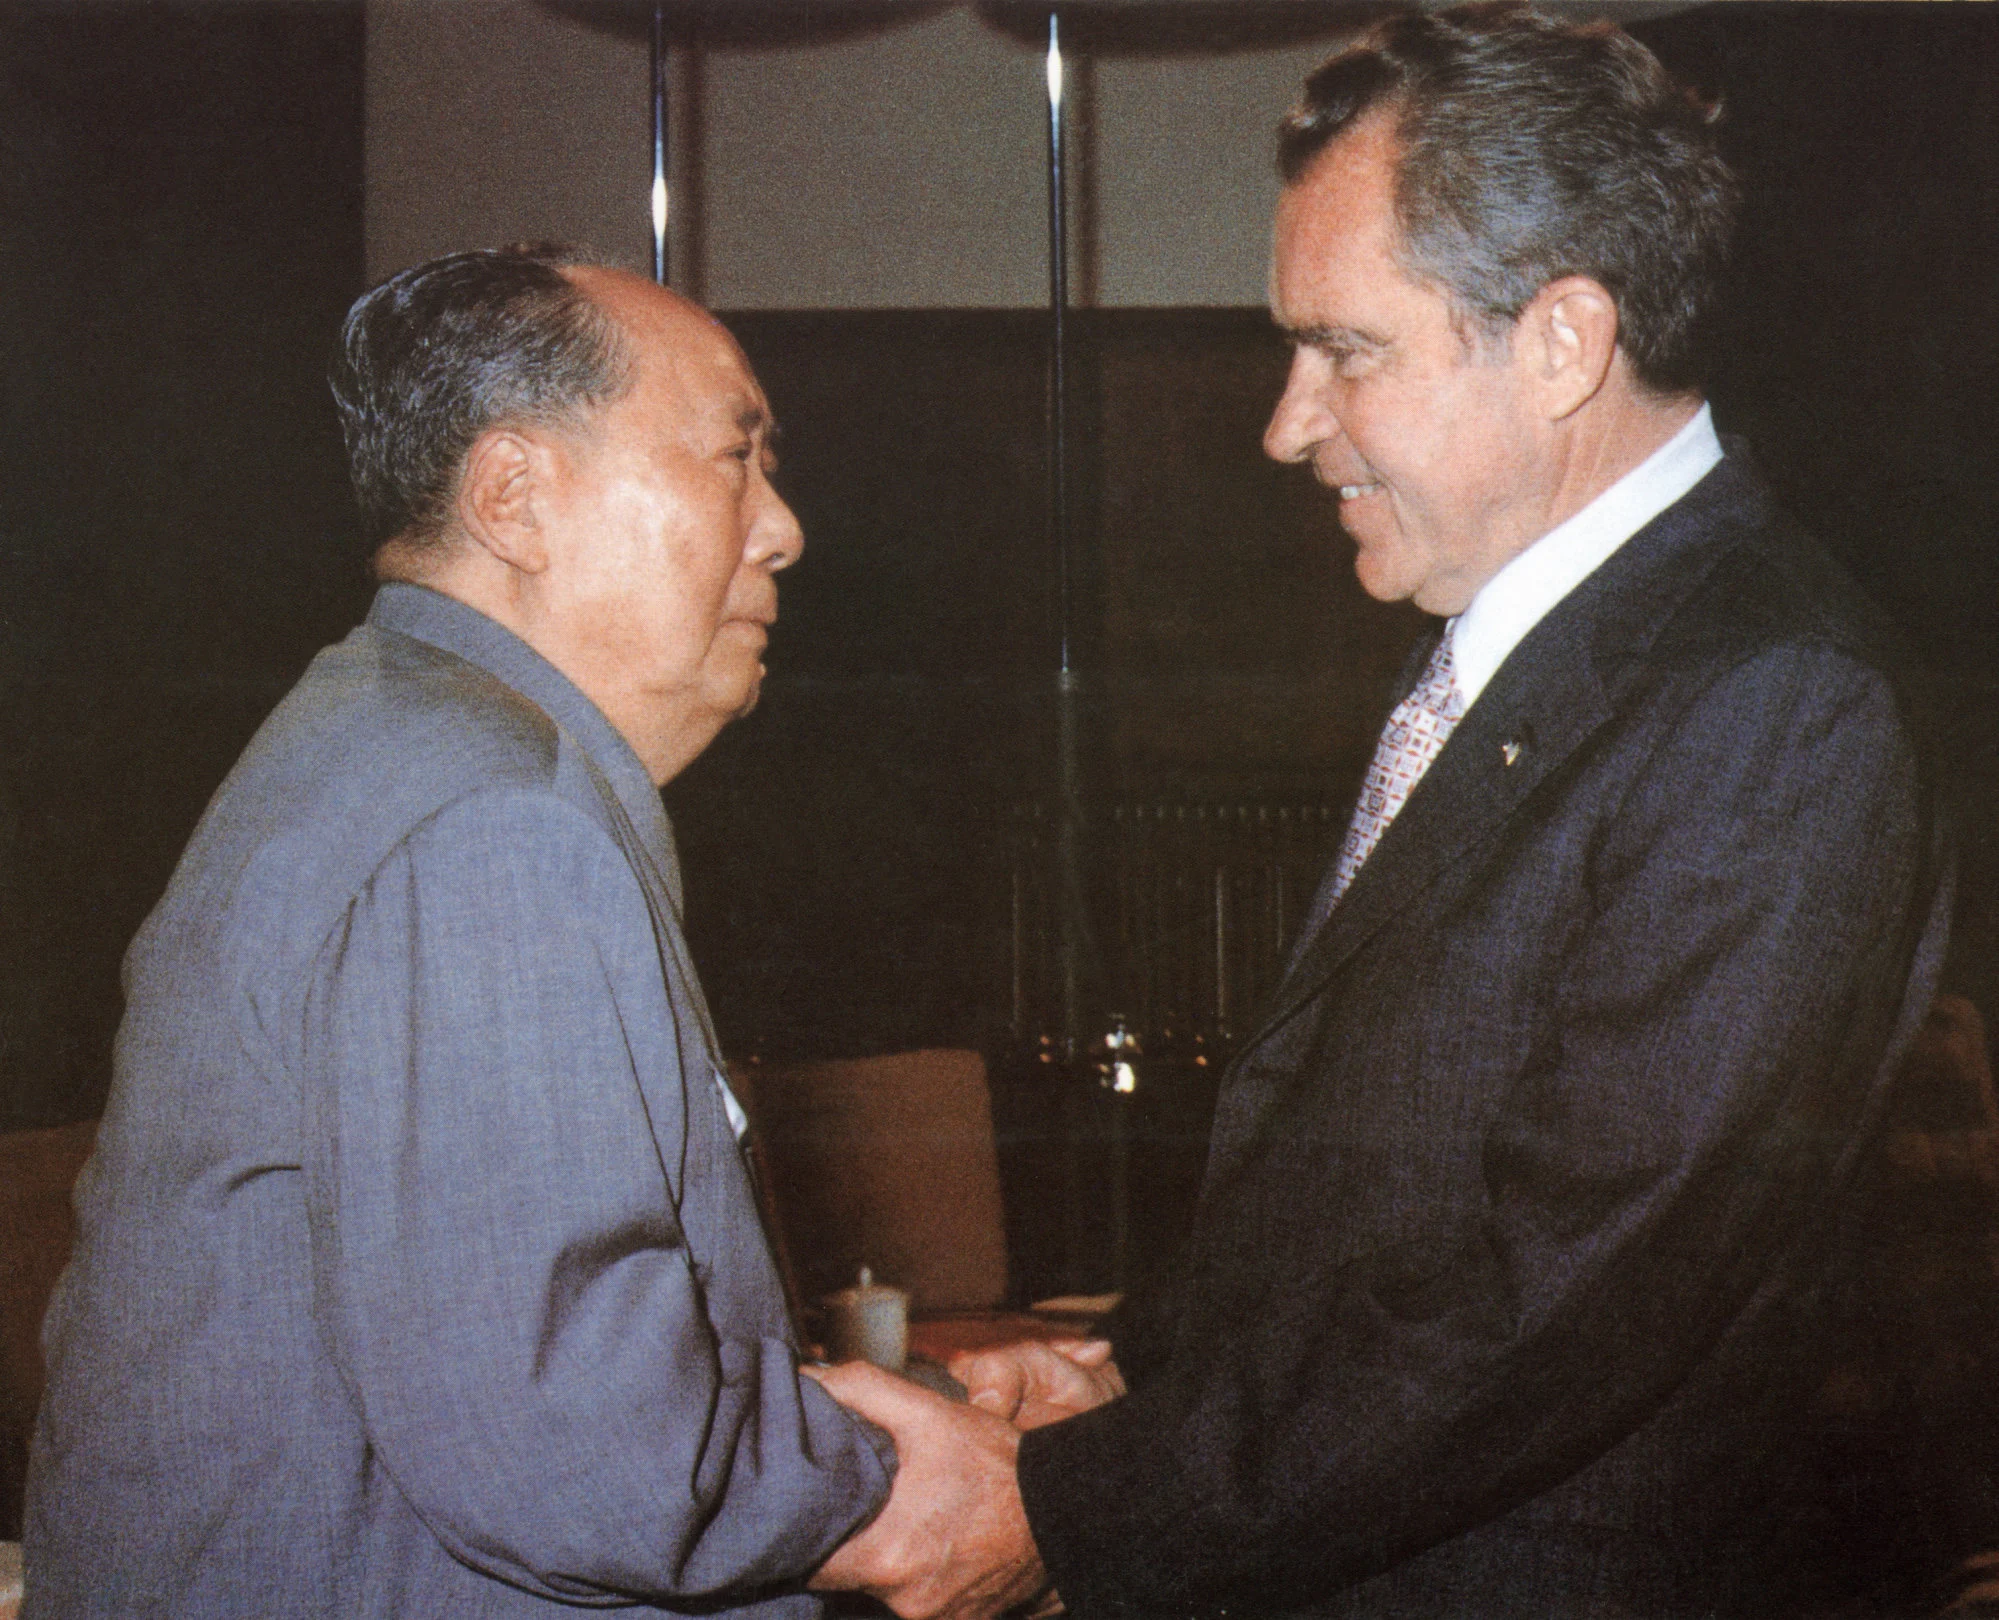 Mao Zedong welcoming US President Richard Nixon at his home in Beijing on 22 Feb 1972.  Nixon urged China to join the US in a 'long march together' on different roads to world peace. Photo: AFP